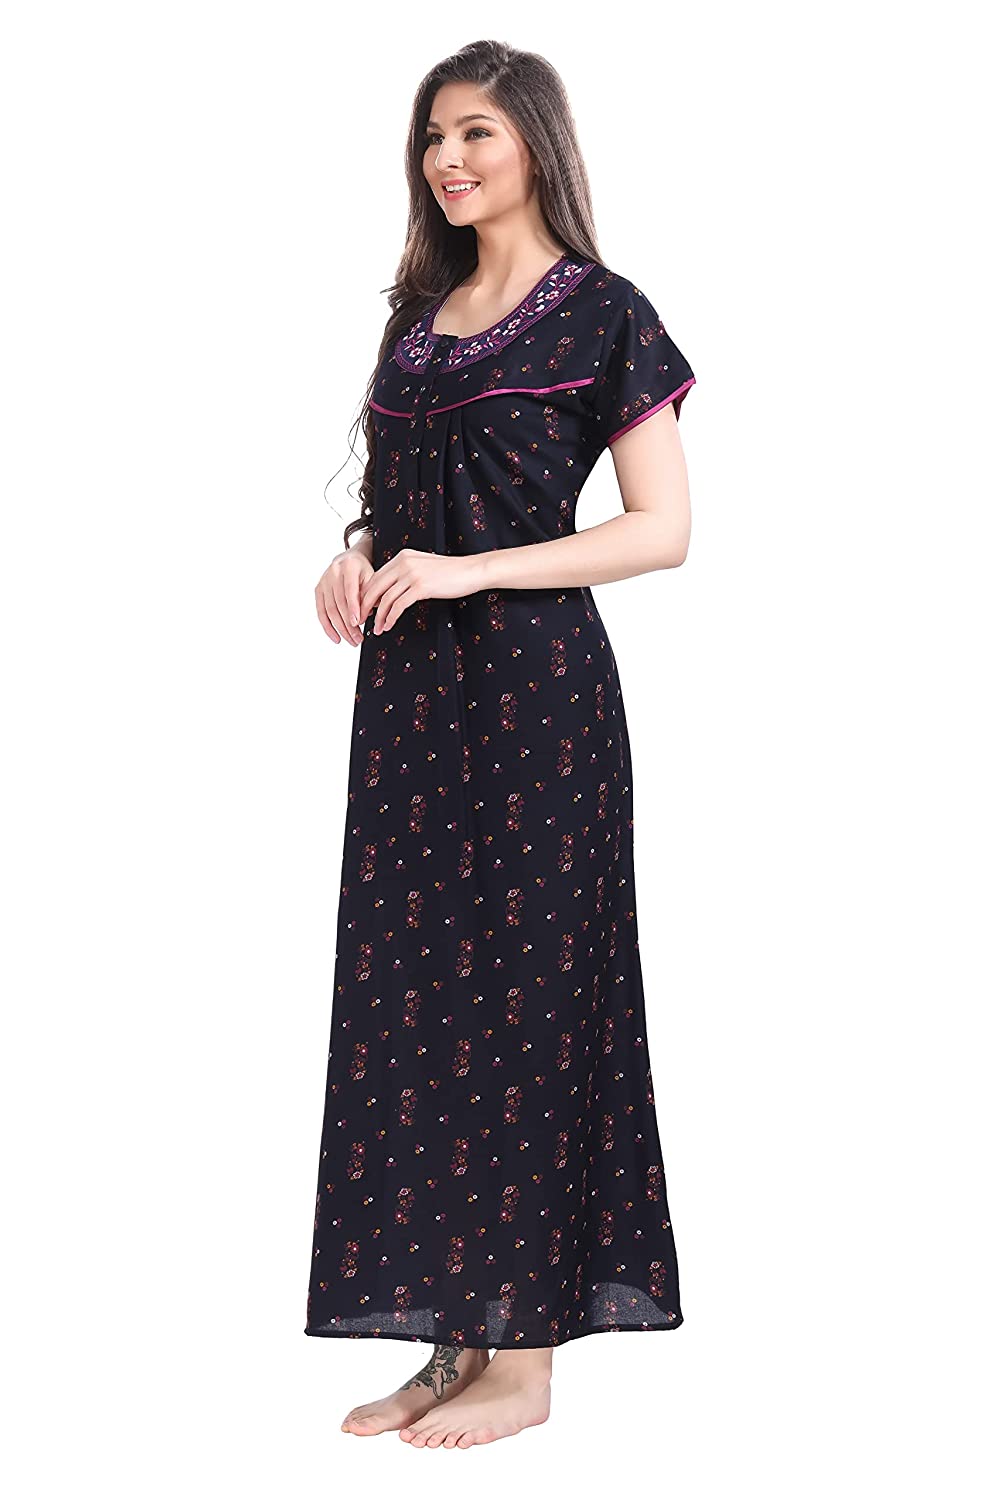 Buy CIERGE Women's Cotton Nighty/Floral Night Dress (Maxi Night Gown) (S  (Bust 38), Blue) at Amazon.in